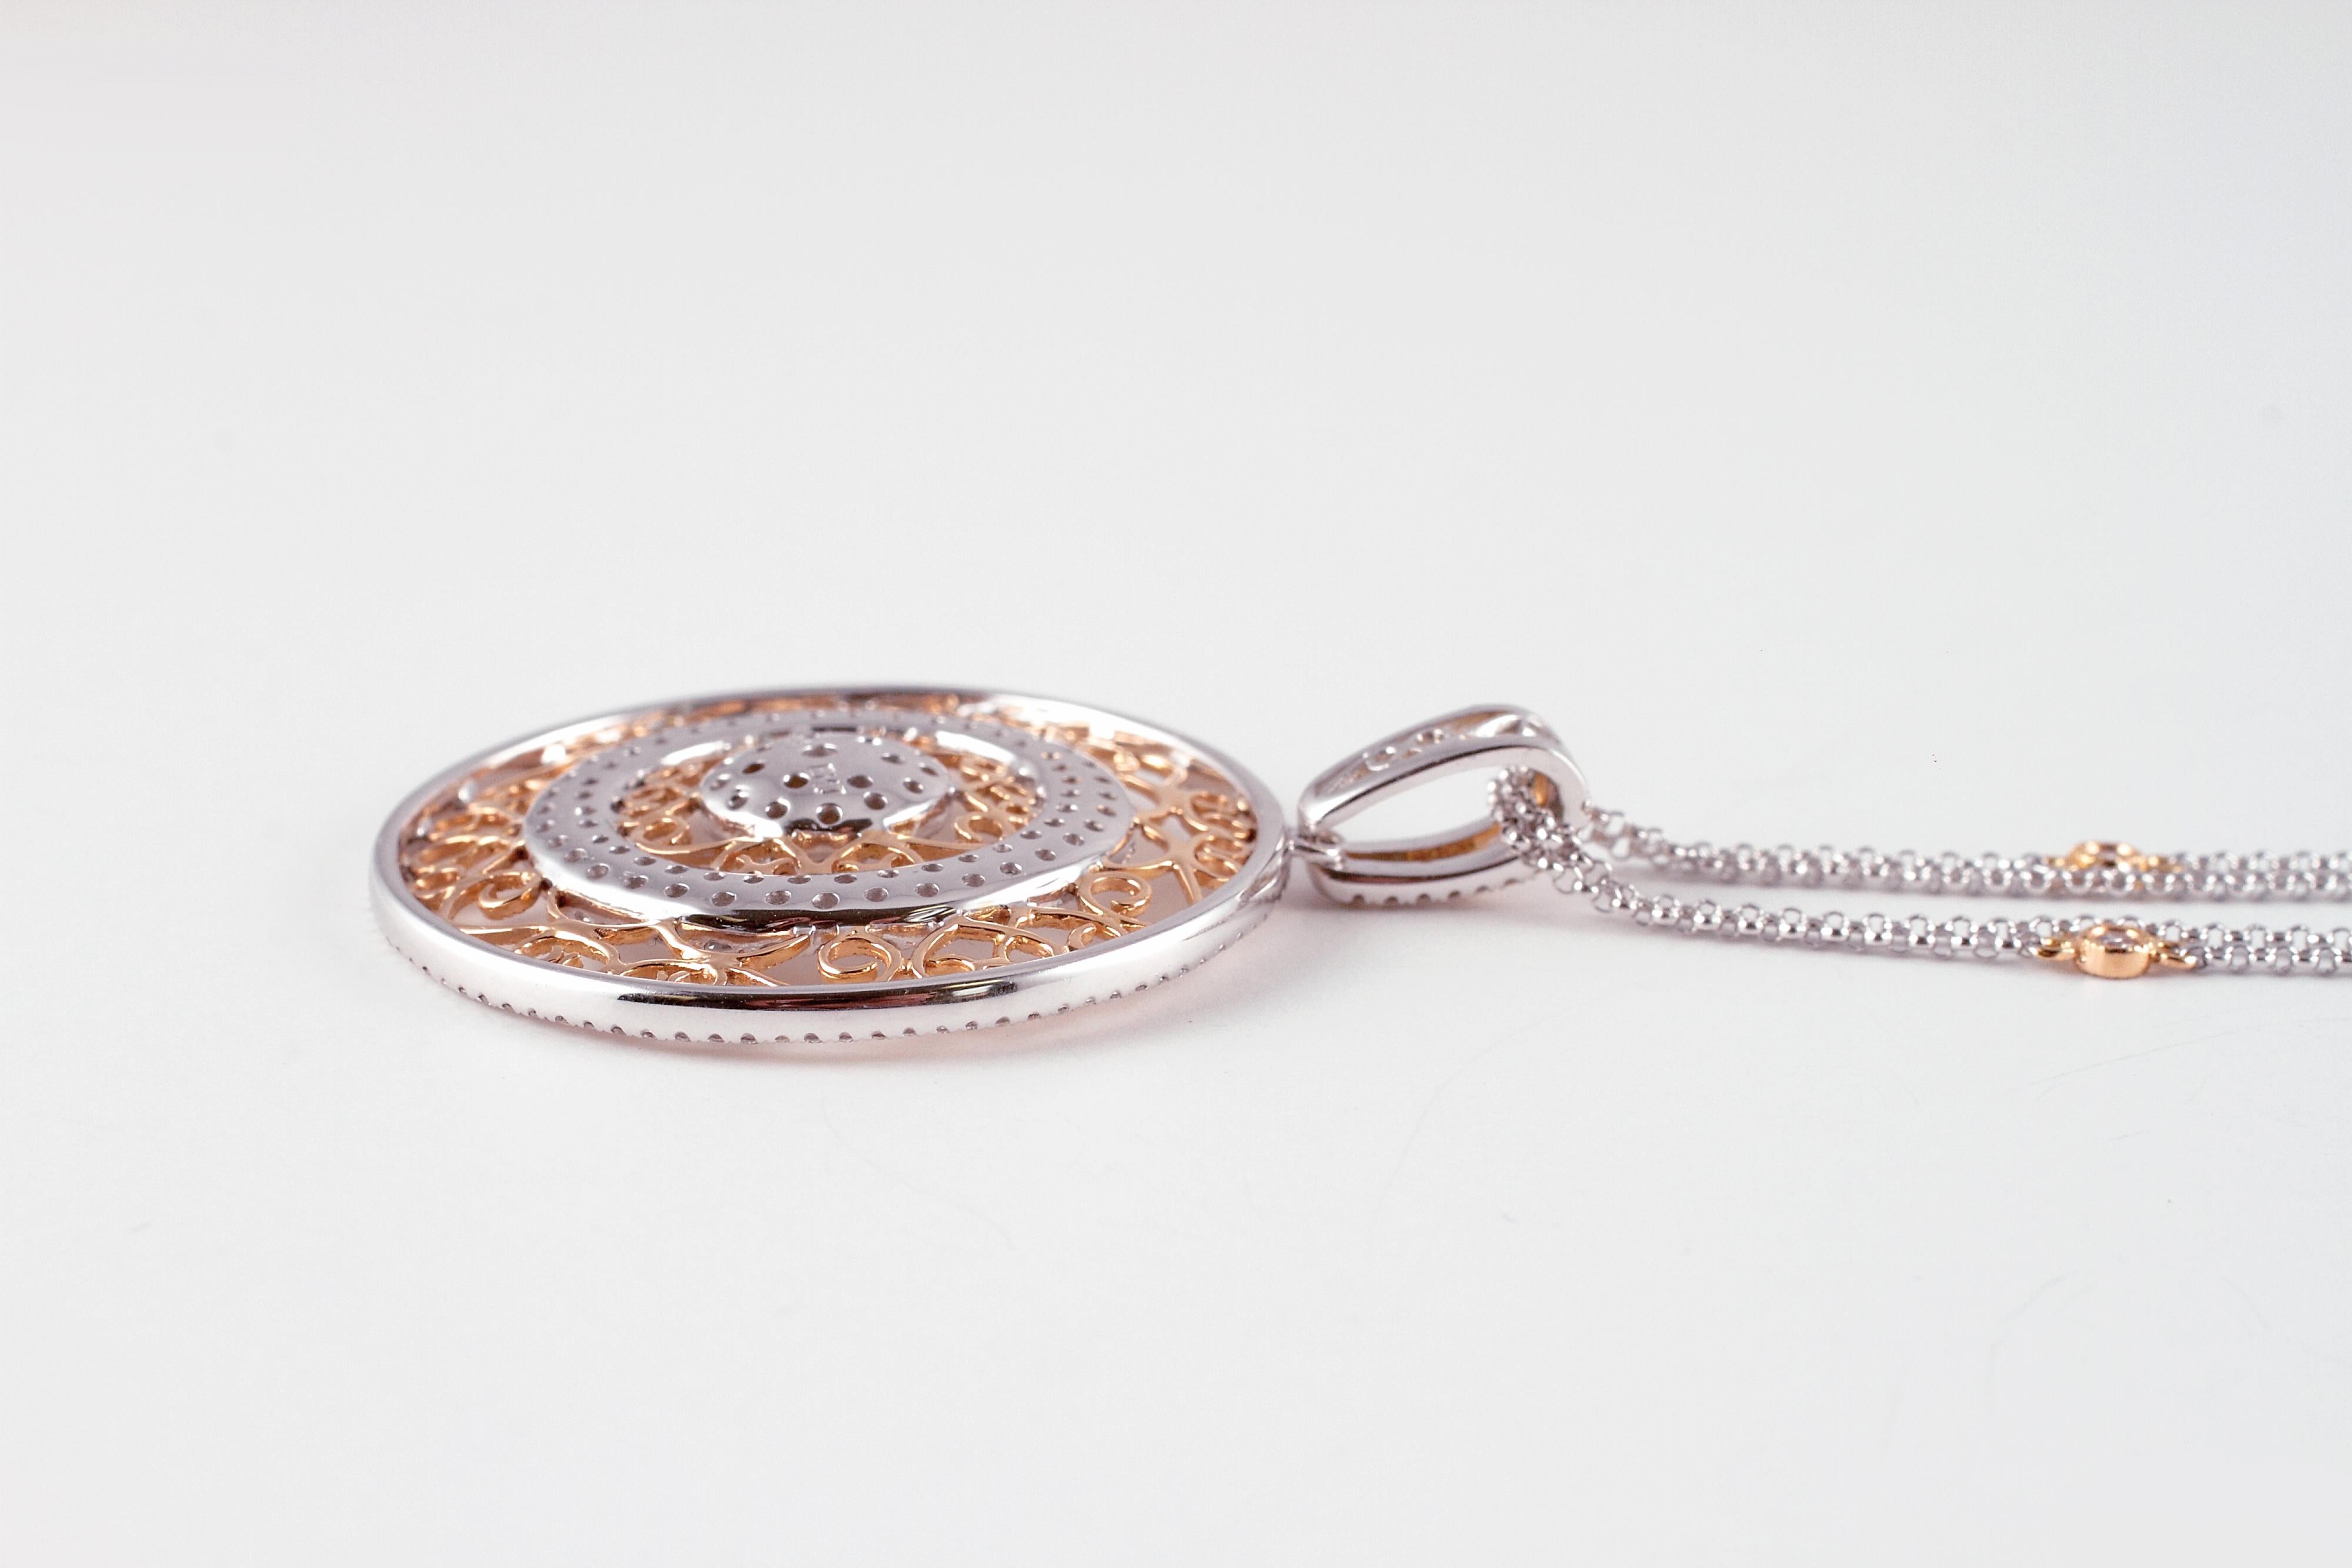 So versatile and light weight!  The 18 karat yellow and white gold , double link chain supports bezel-set, diamonds and the yellow and white gold, circular, filigree style pendant supports 2.30 carats of diamonds.  The diamonds are stated to be VS 1